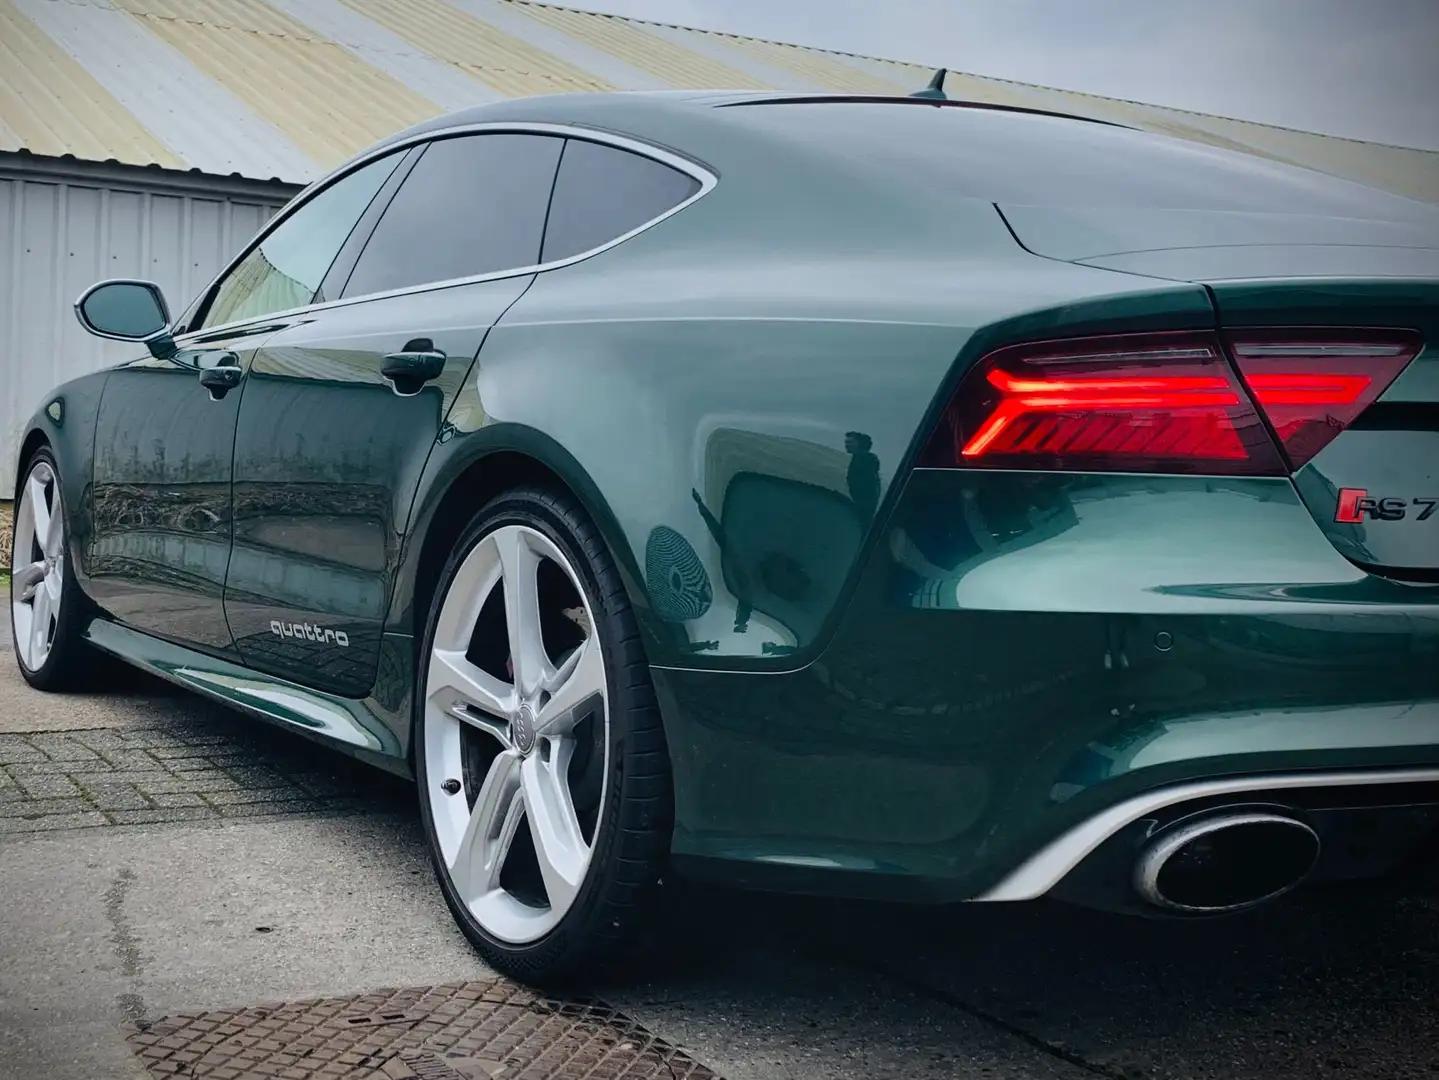 Audi RS7 Verdant Green - Audi Exclusive - from collector Зелений - 2